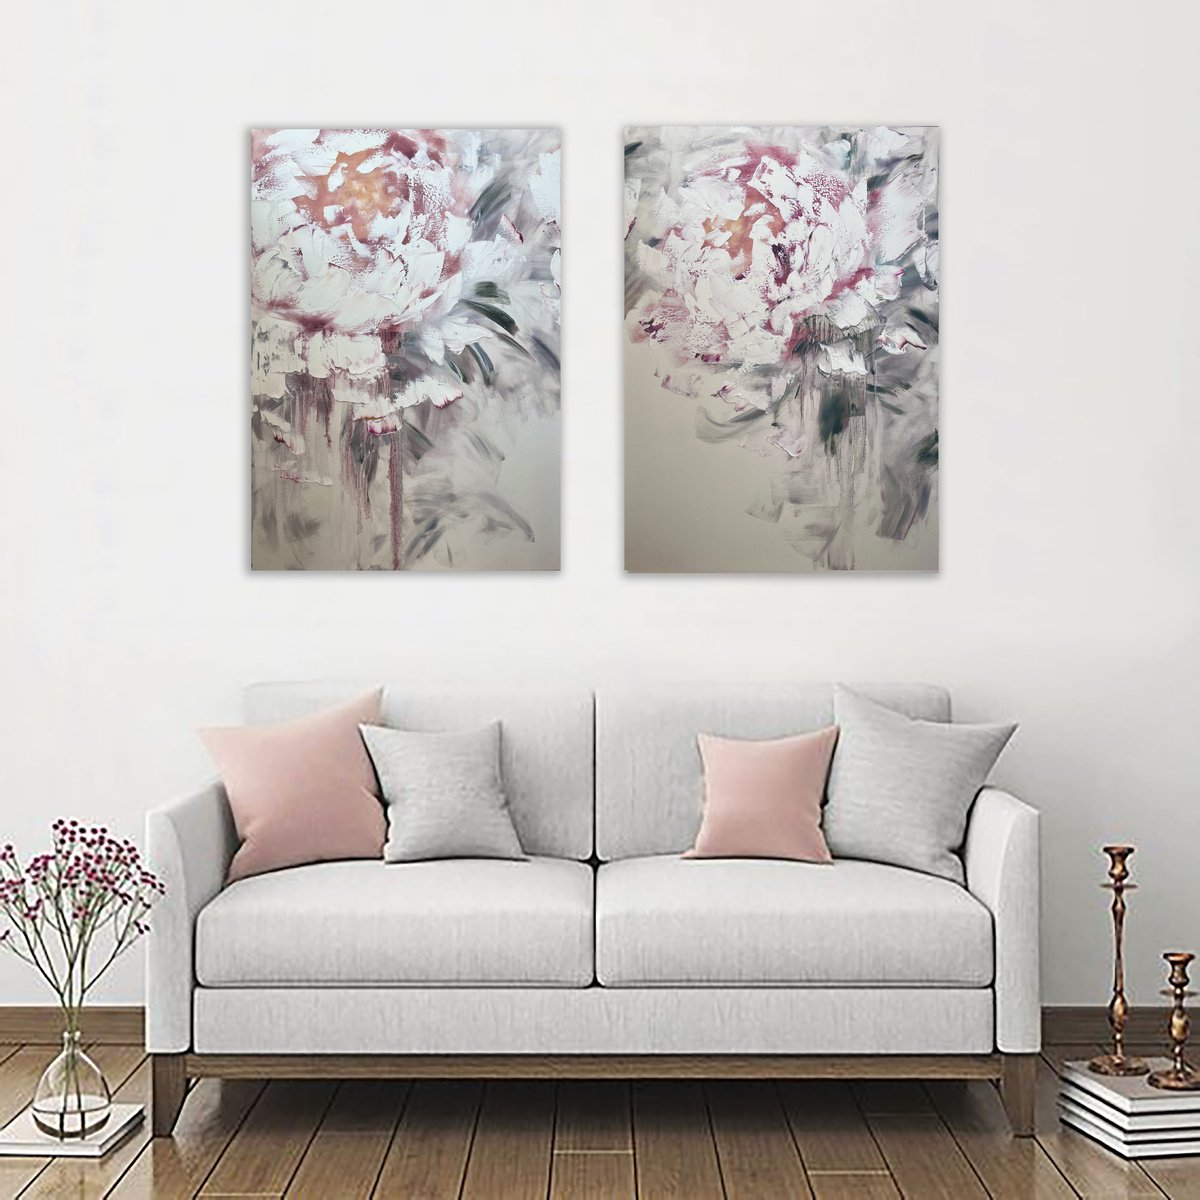 100x160cm. / abstract flowers painting / New life 2 set by Marina Skromova